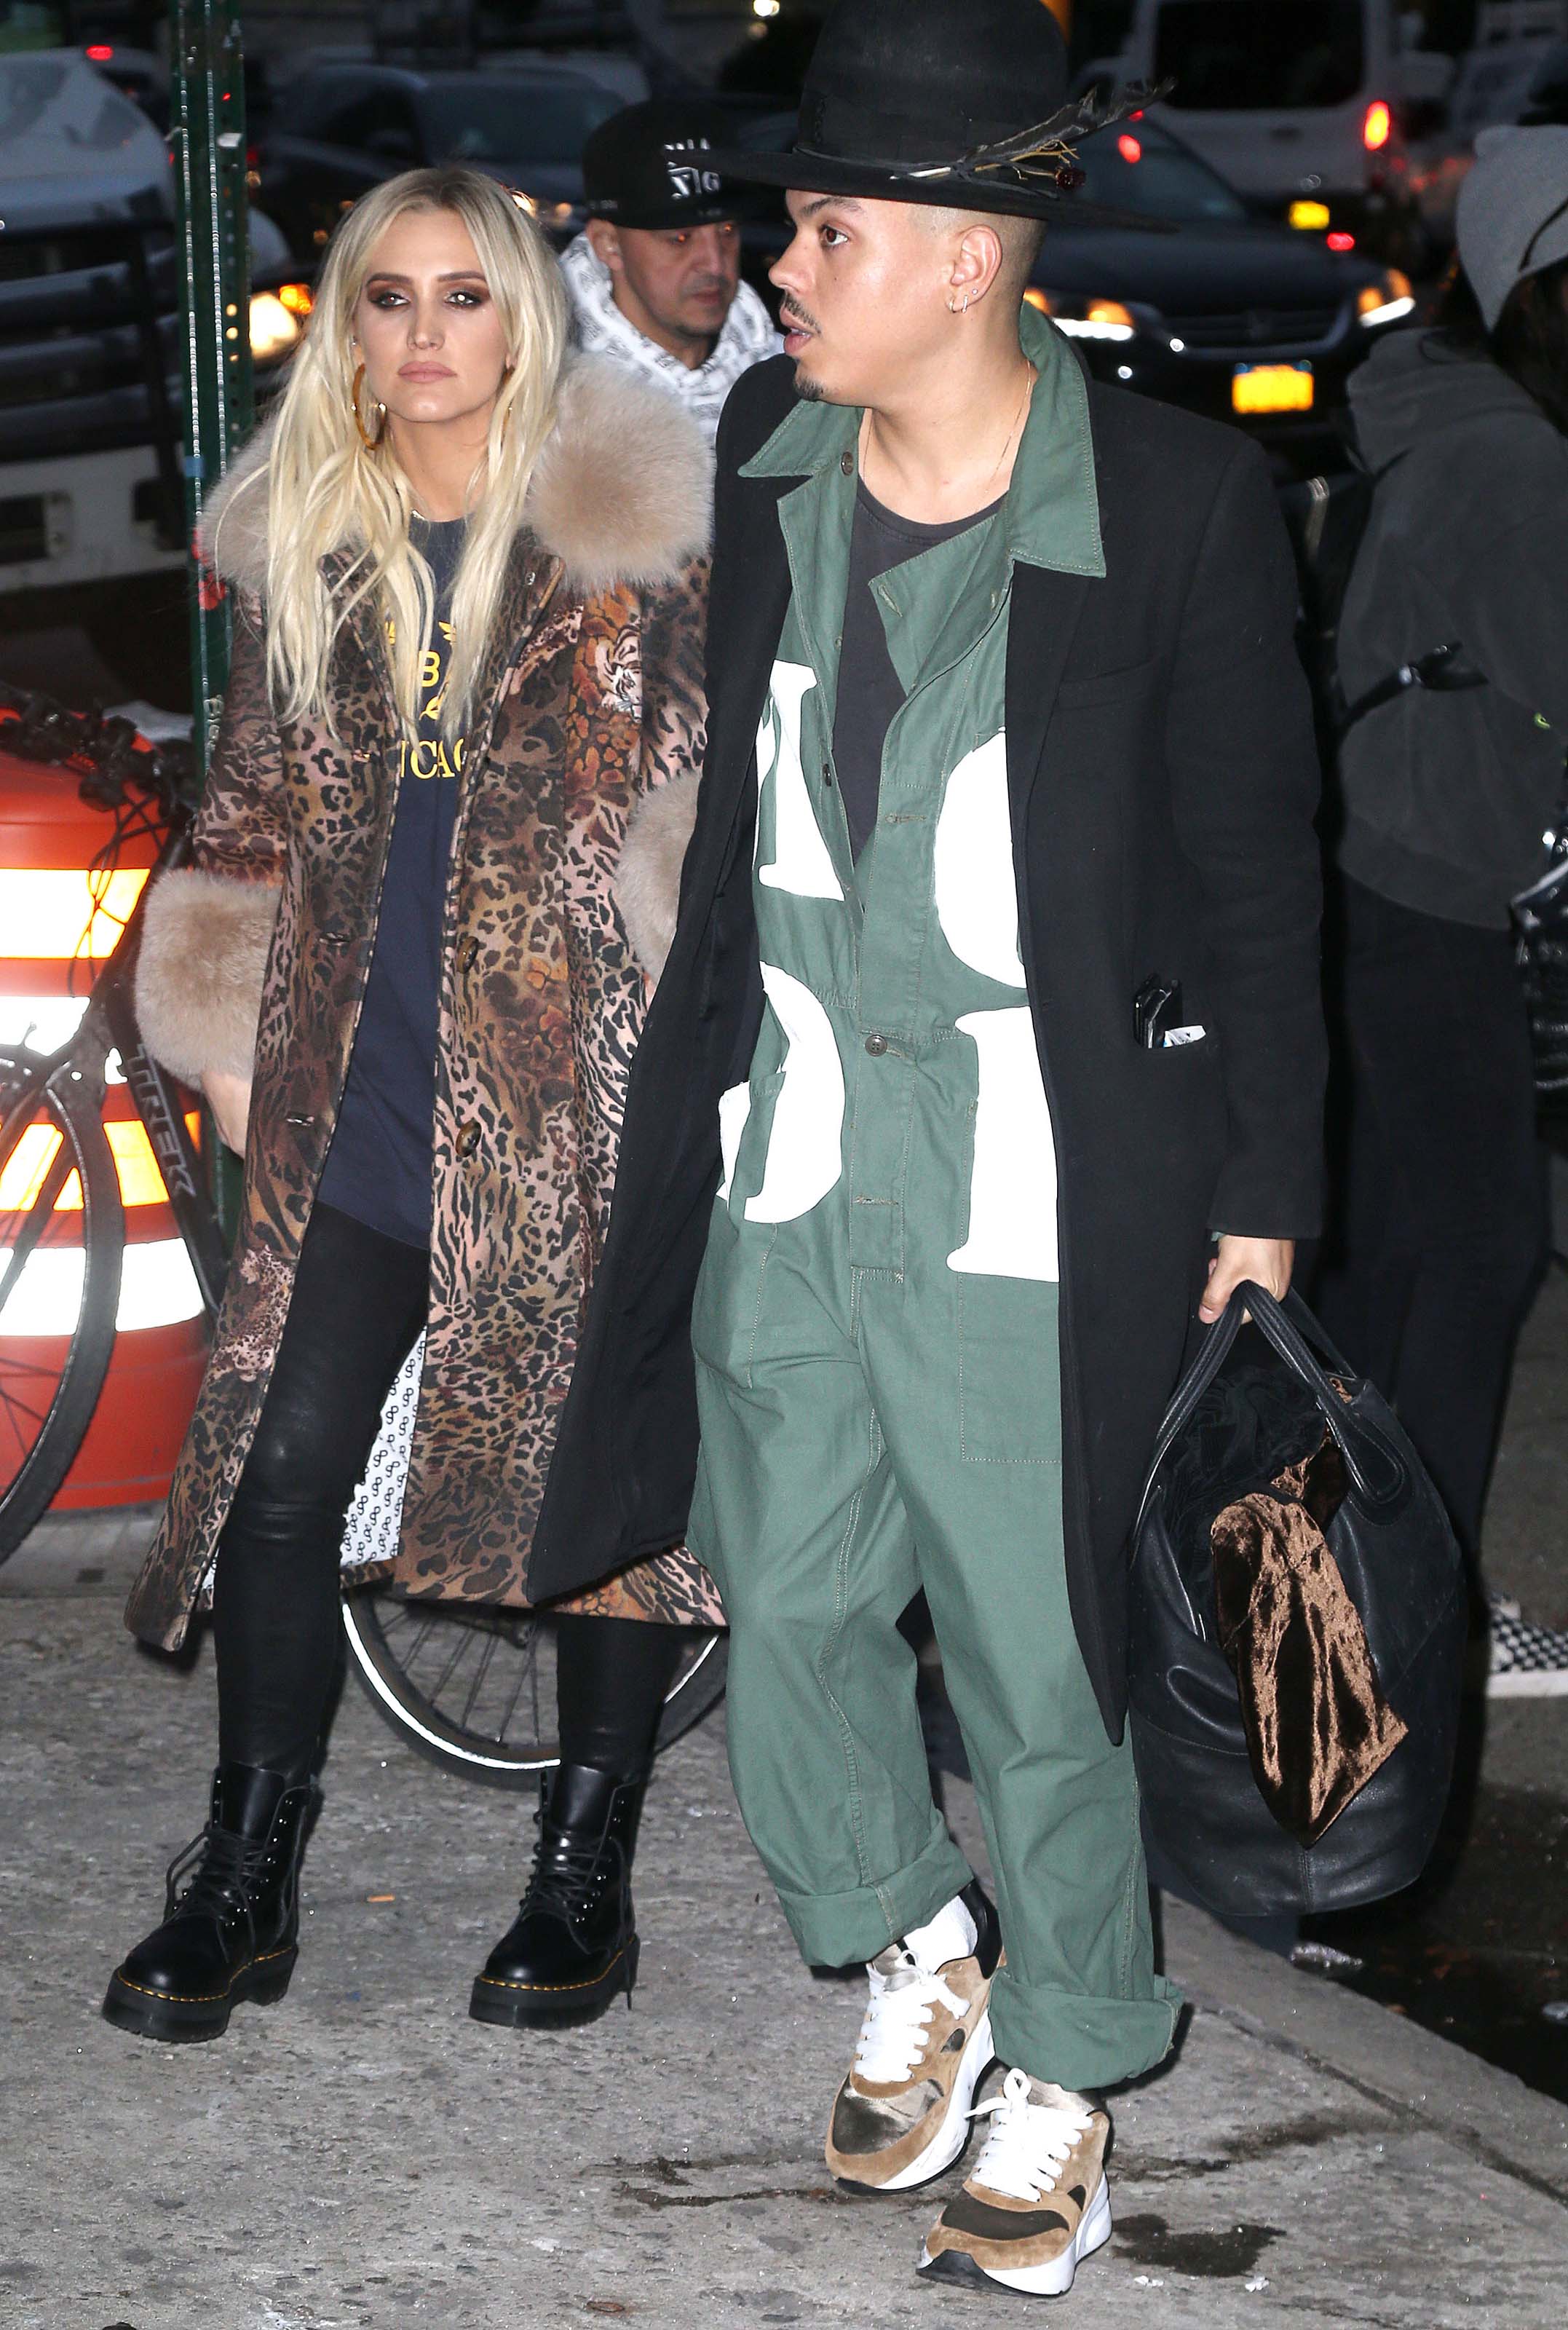 Ashlee Simpson out and about in NYC